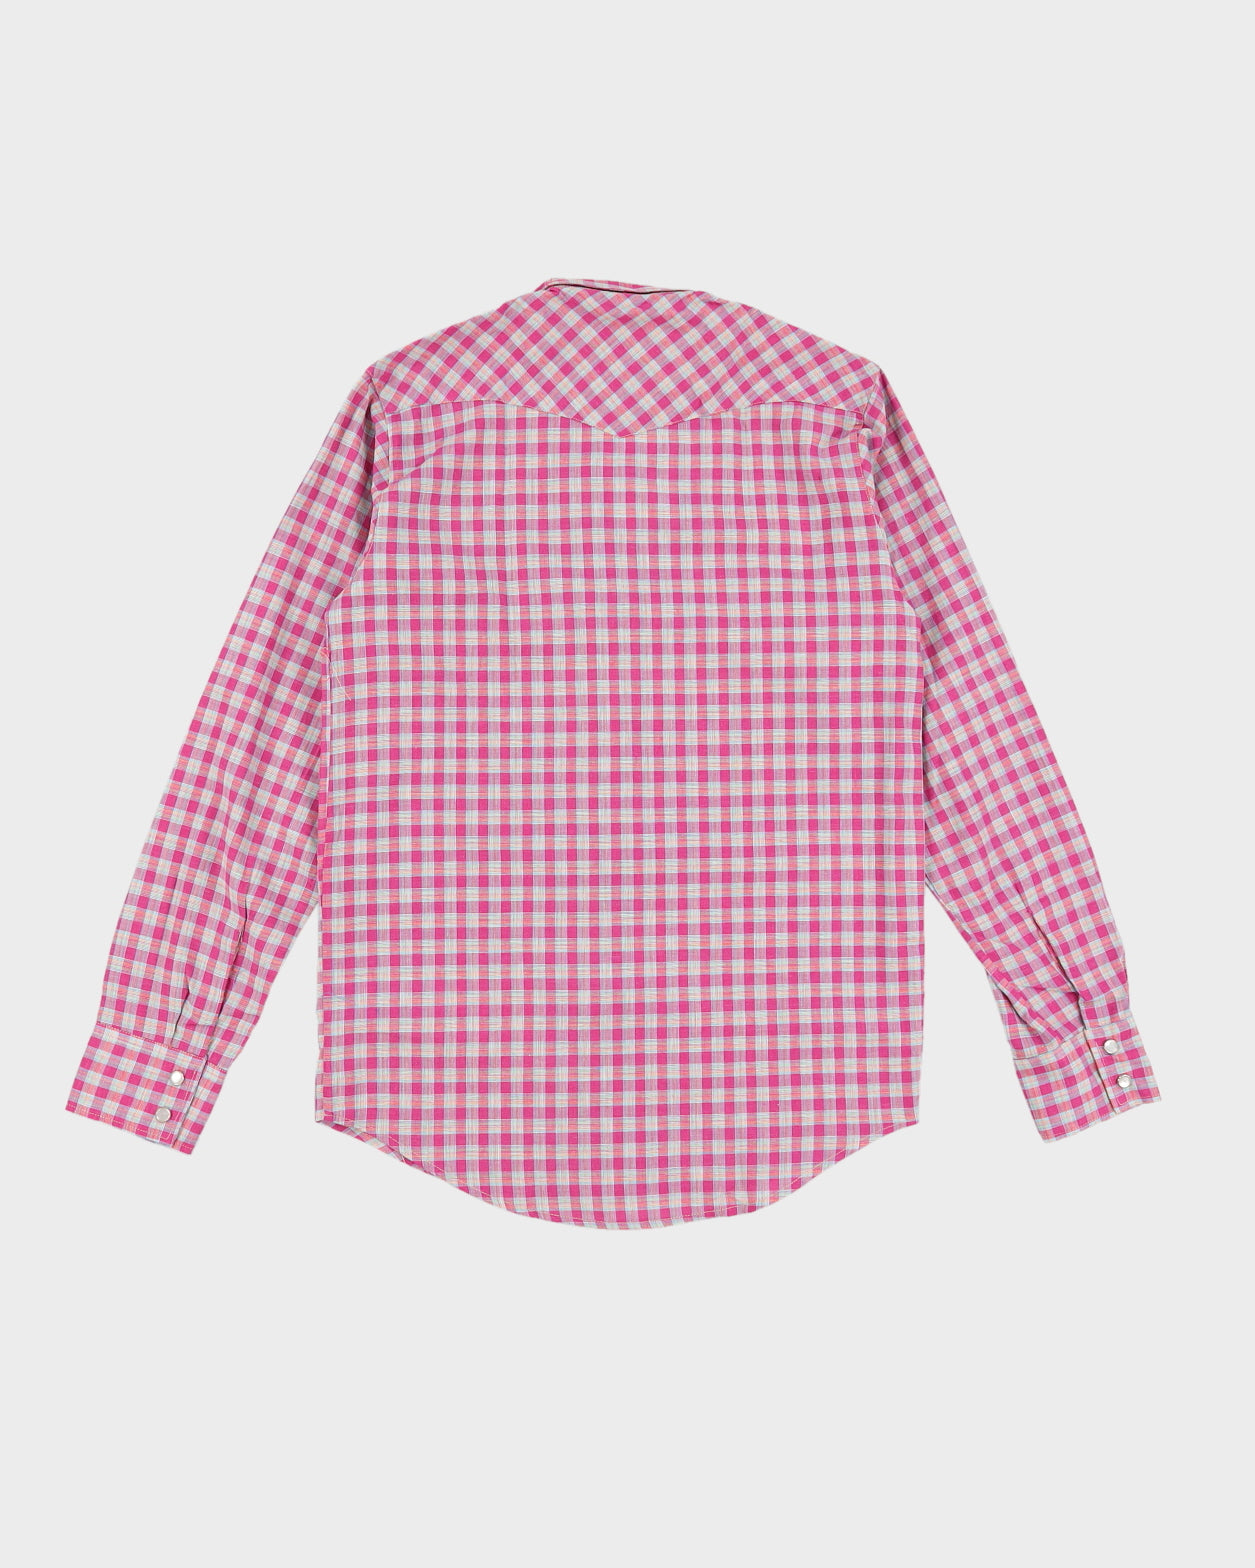 Vintage 80s Benetton Checked Purple Long Sleeved Shirt Deadstock With Tags - S